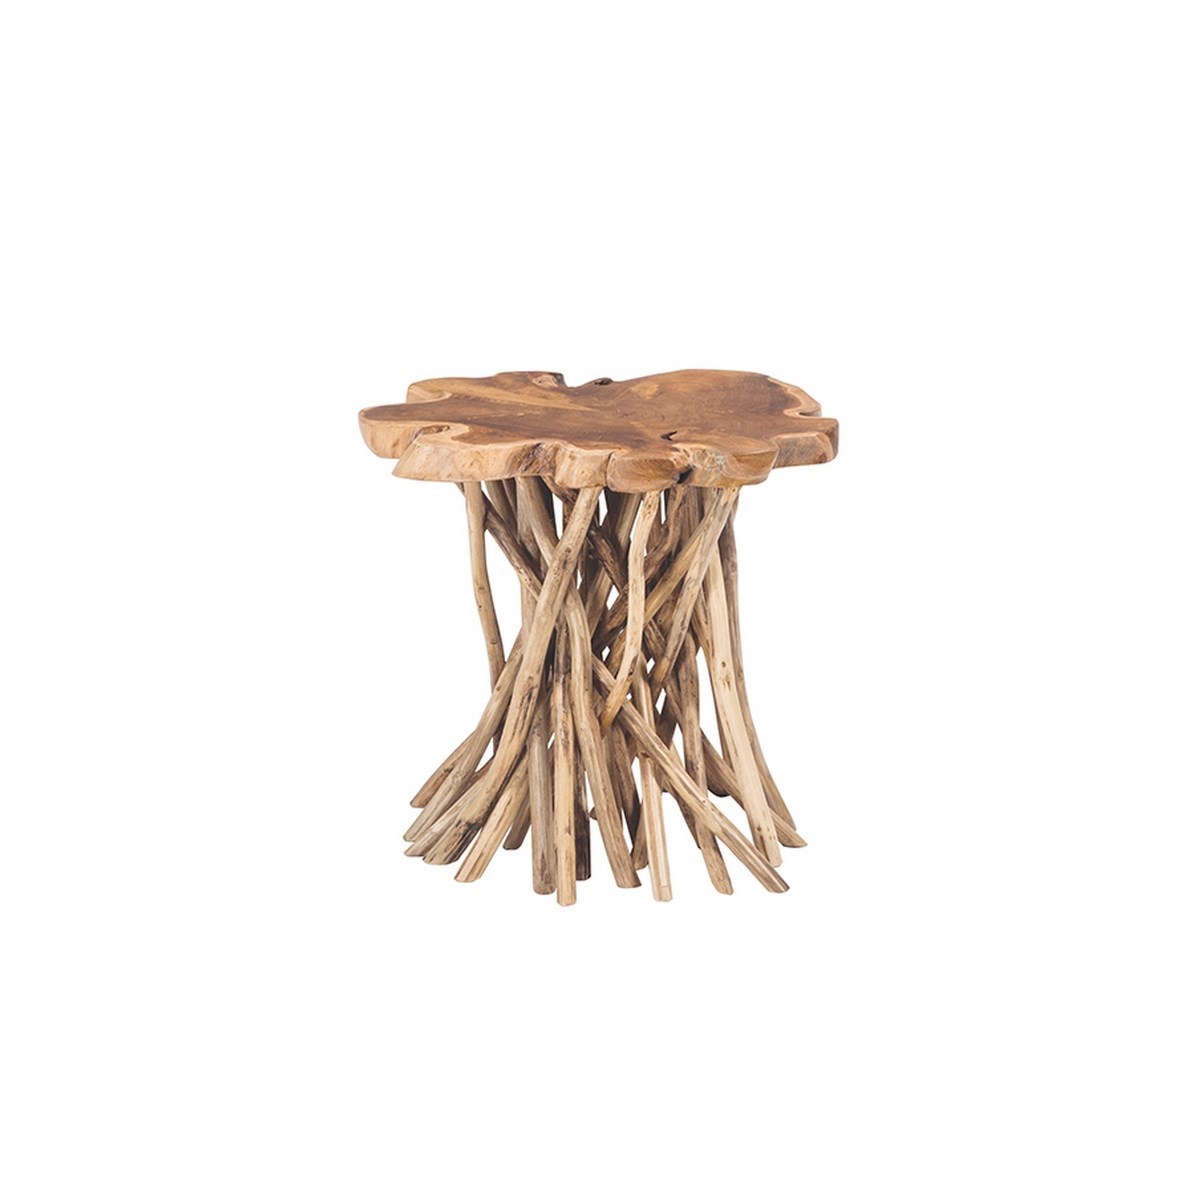 Table d'appoint teck pied en branches